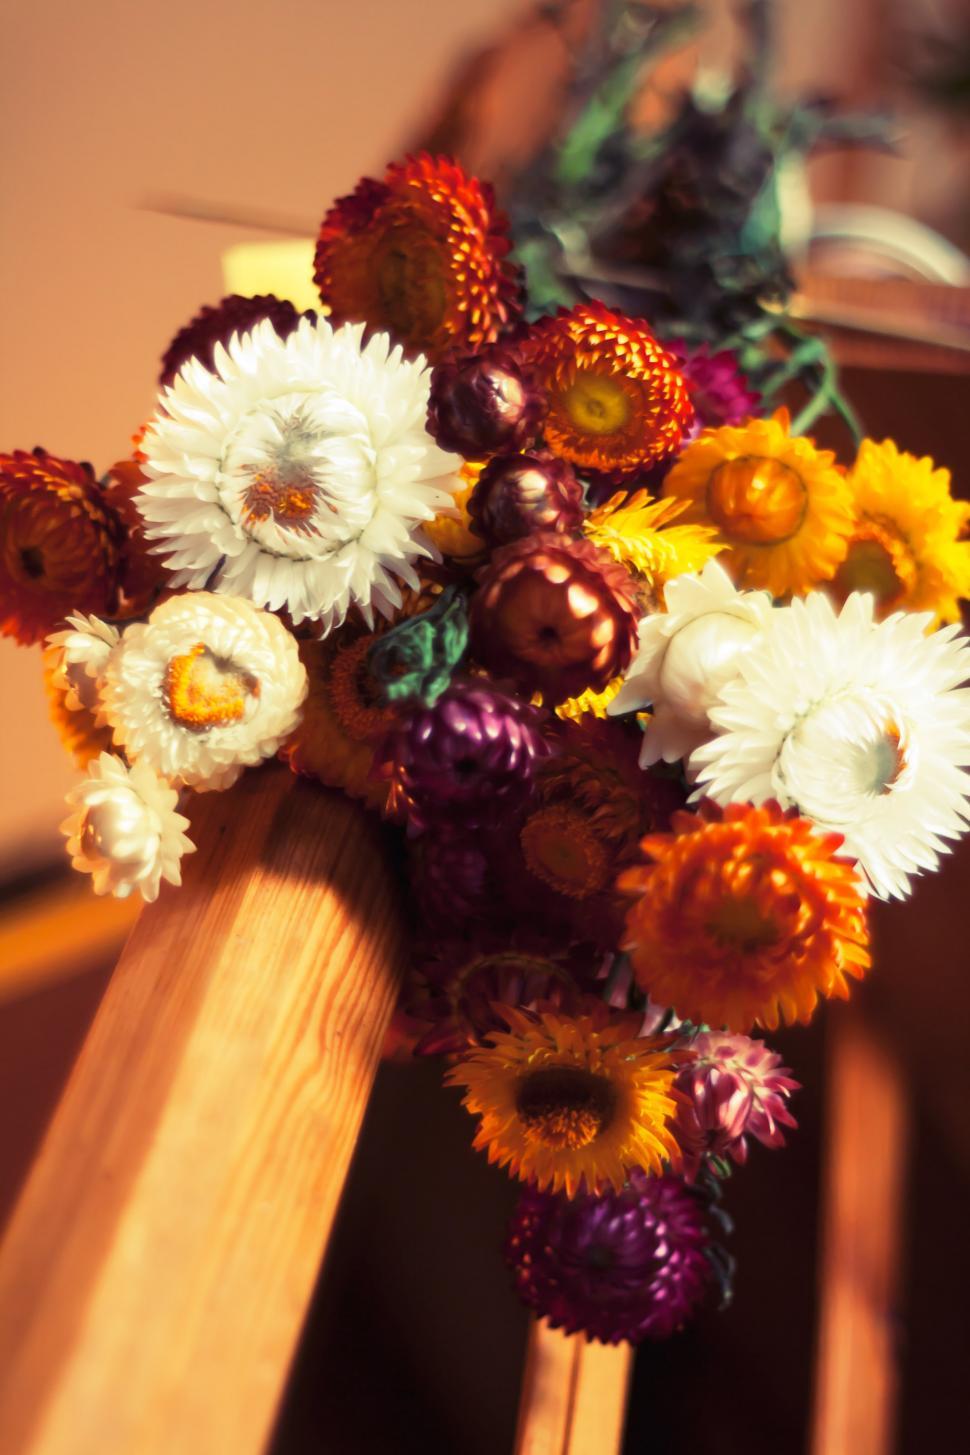 Free Image of Bouquet of Flowers on Wooden Rail 